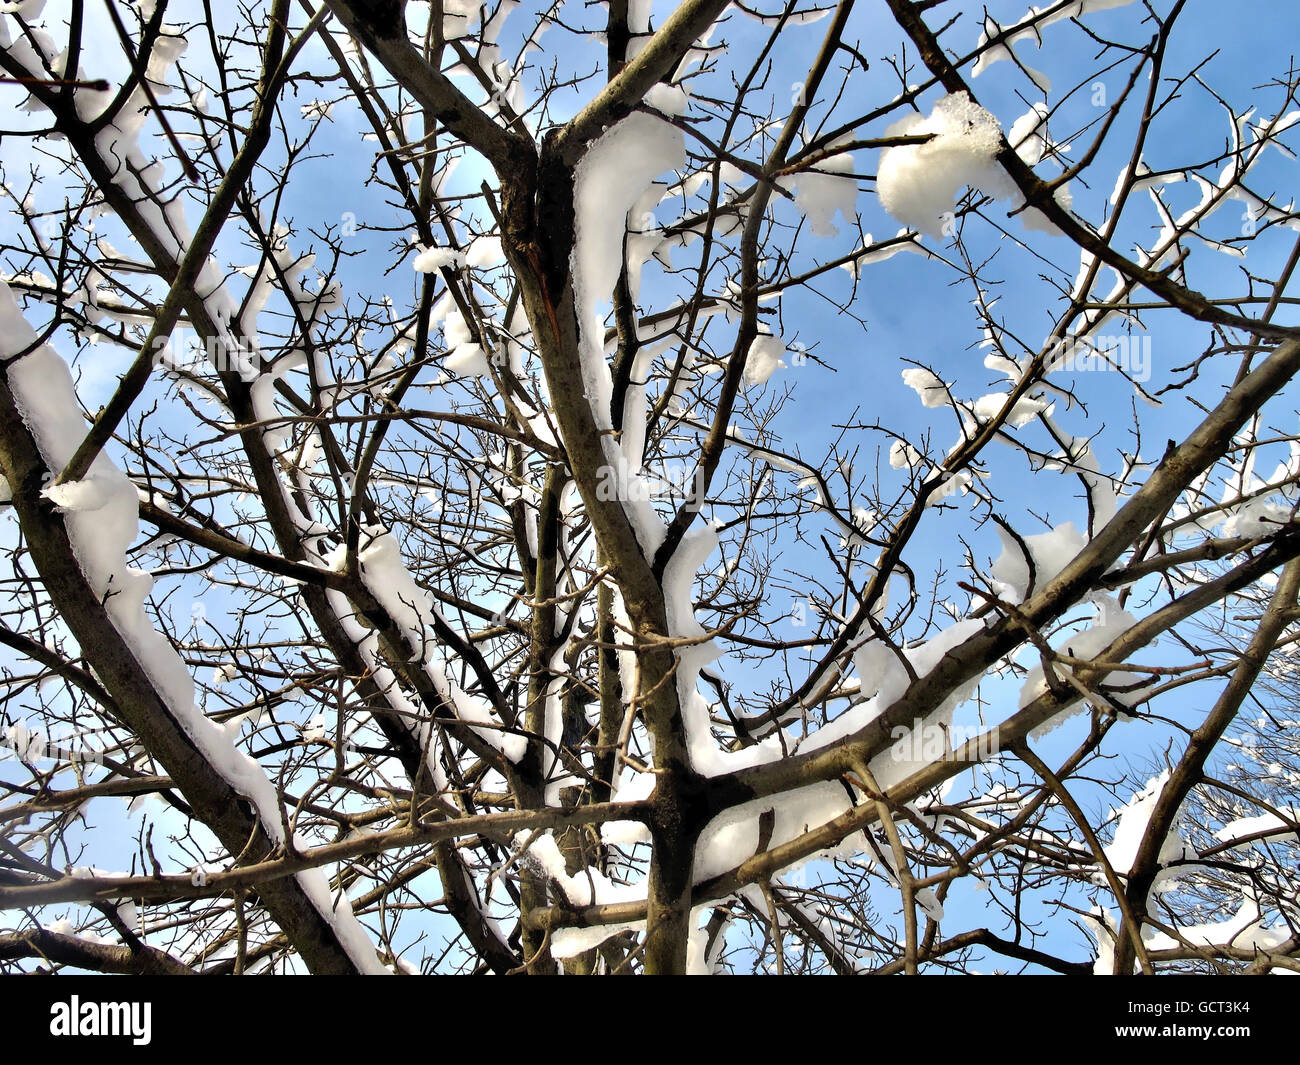 Sunlit branches covered in snow against a blue sky. Stock Photo